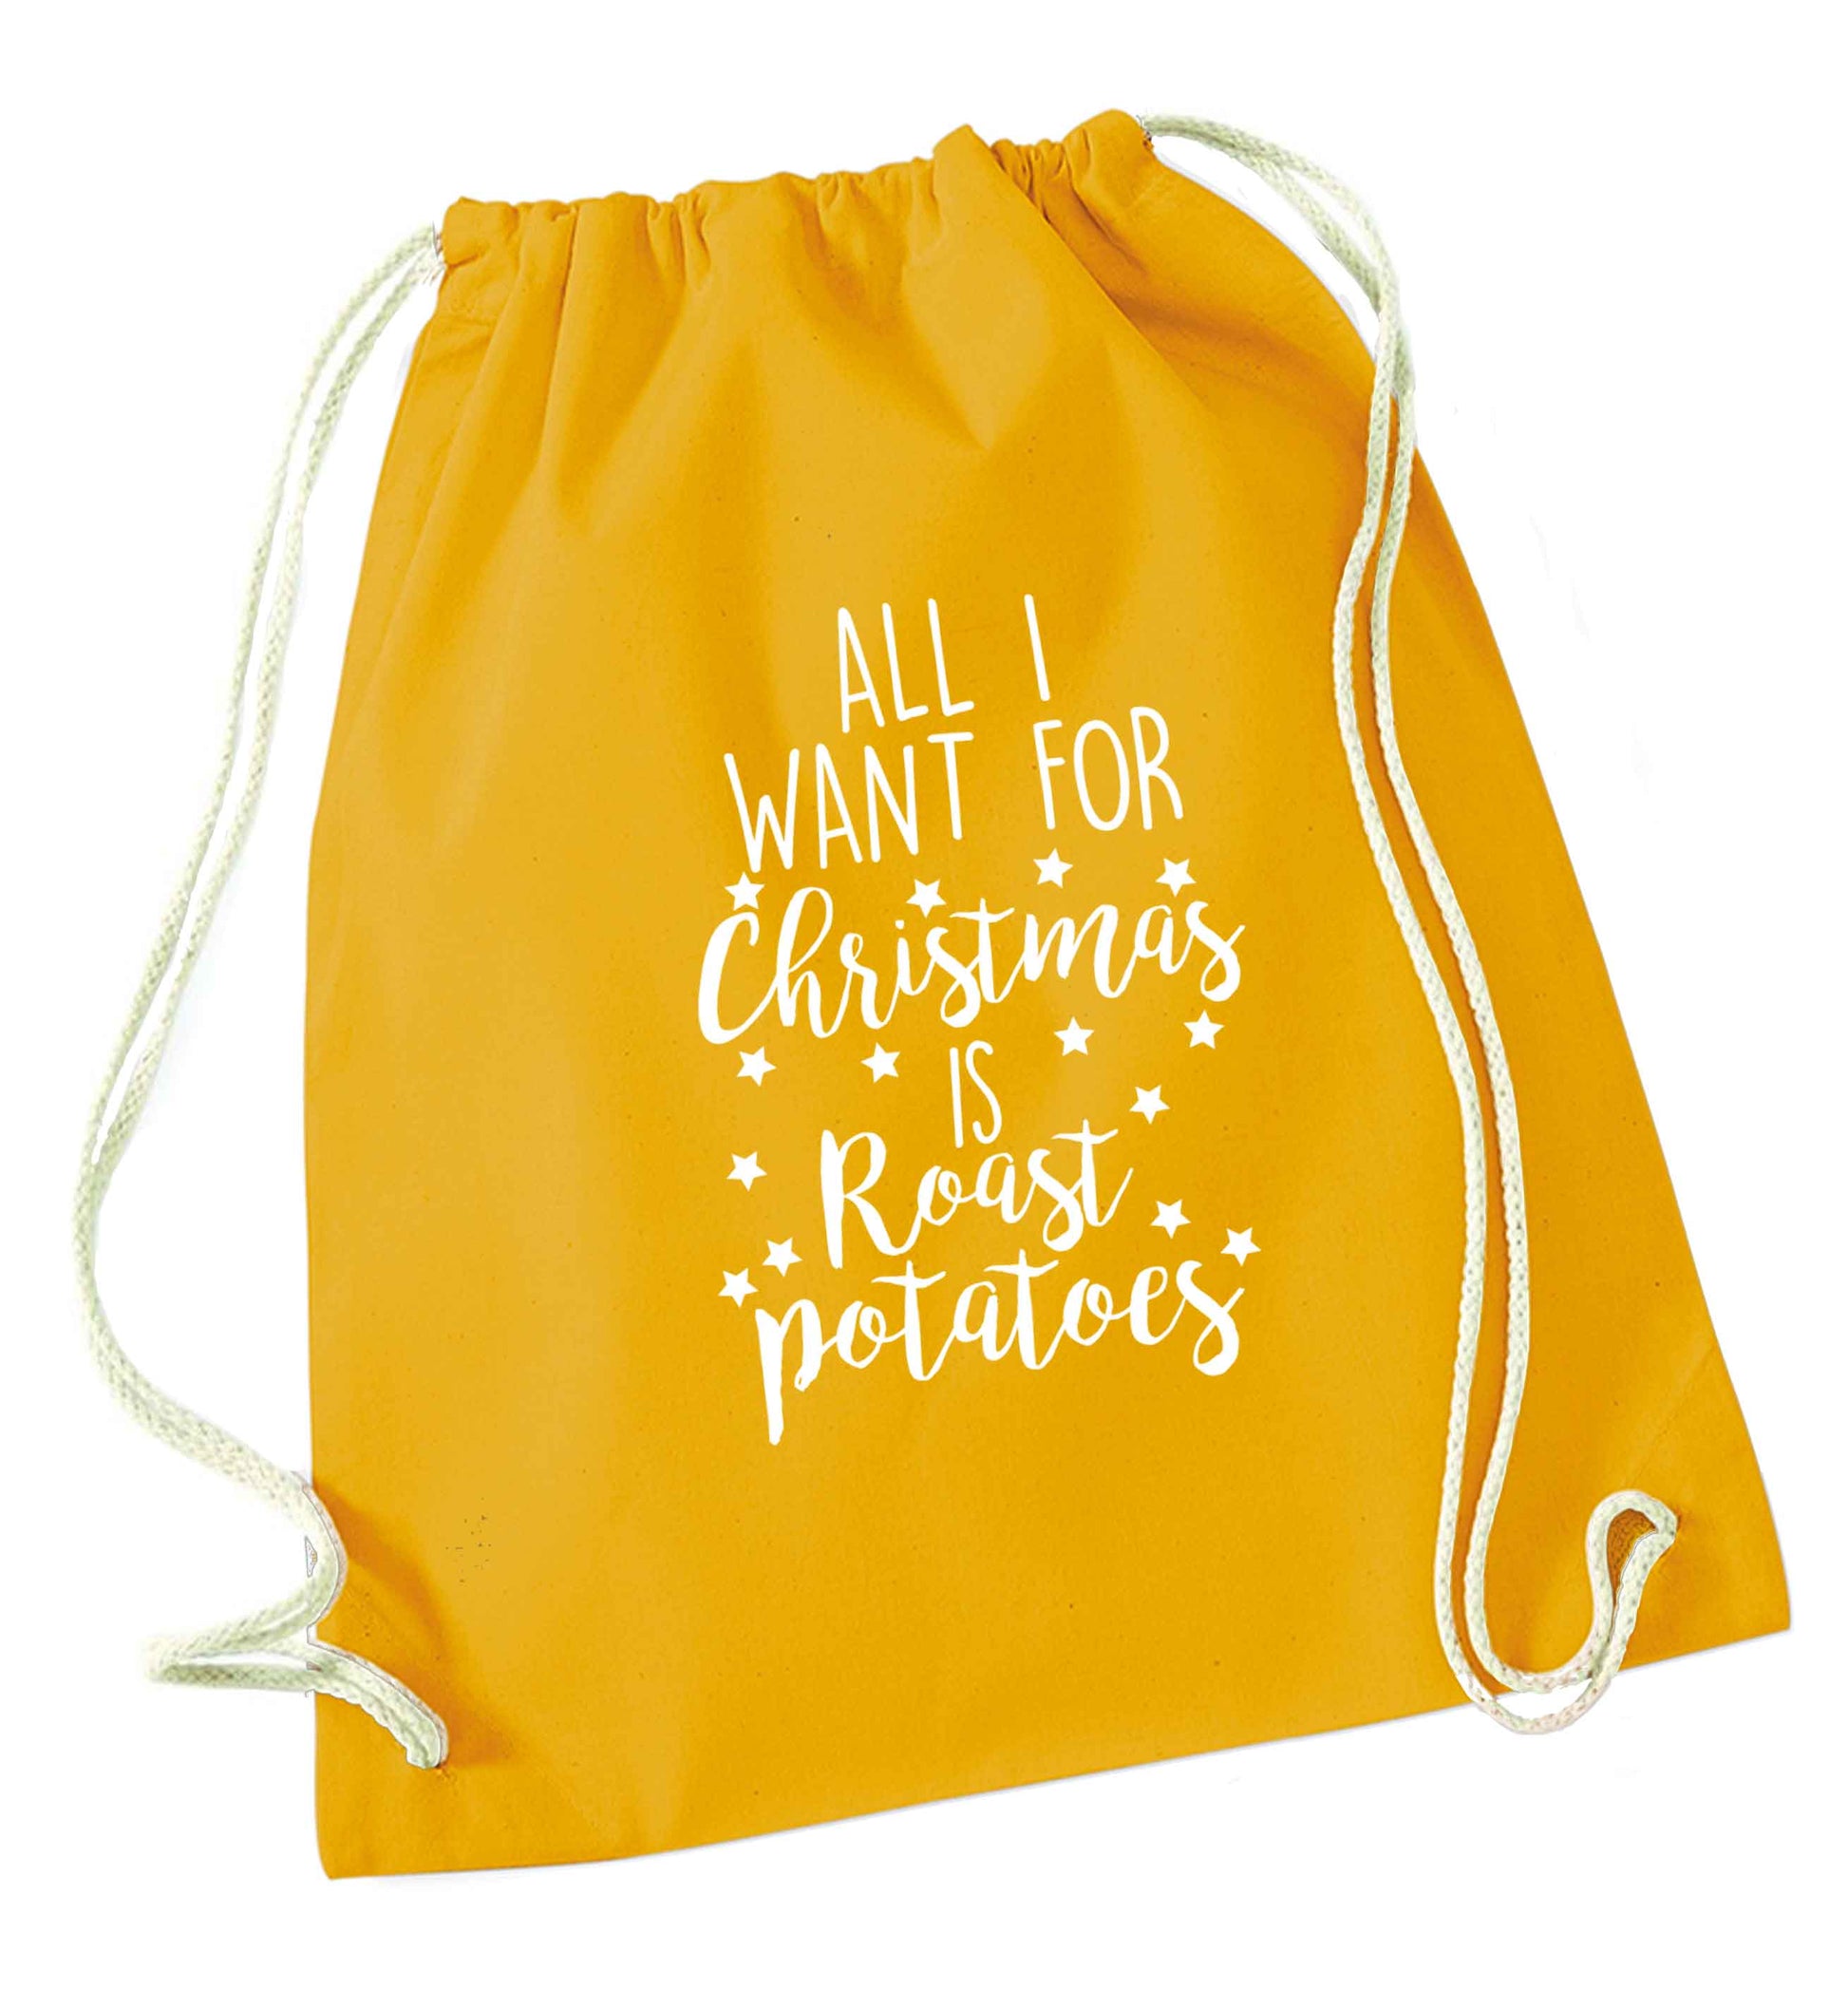 All I want for Christmas is roast potatoes mustard drawstring bag